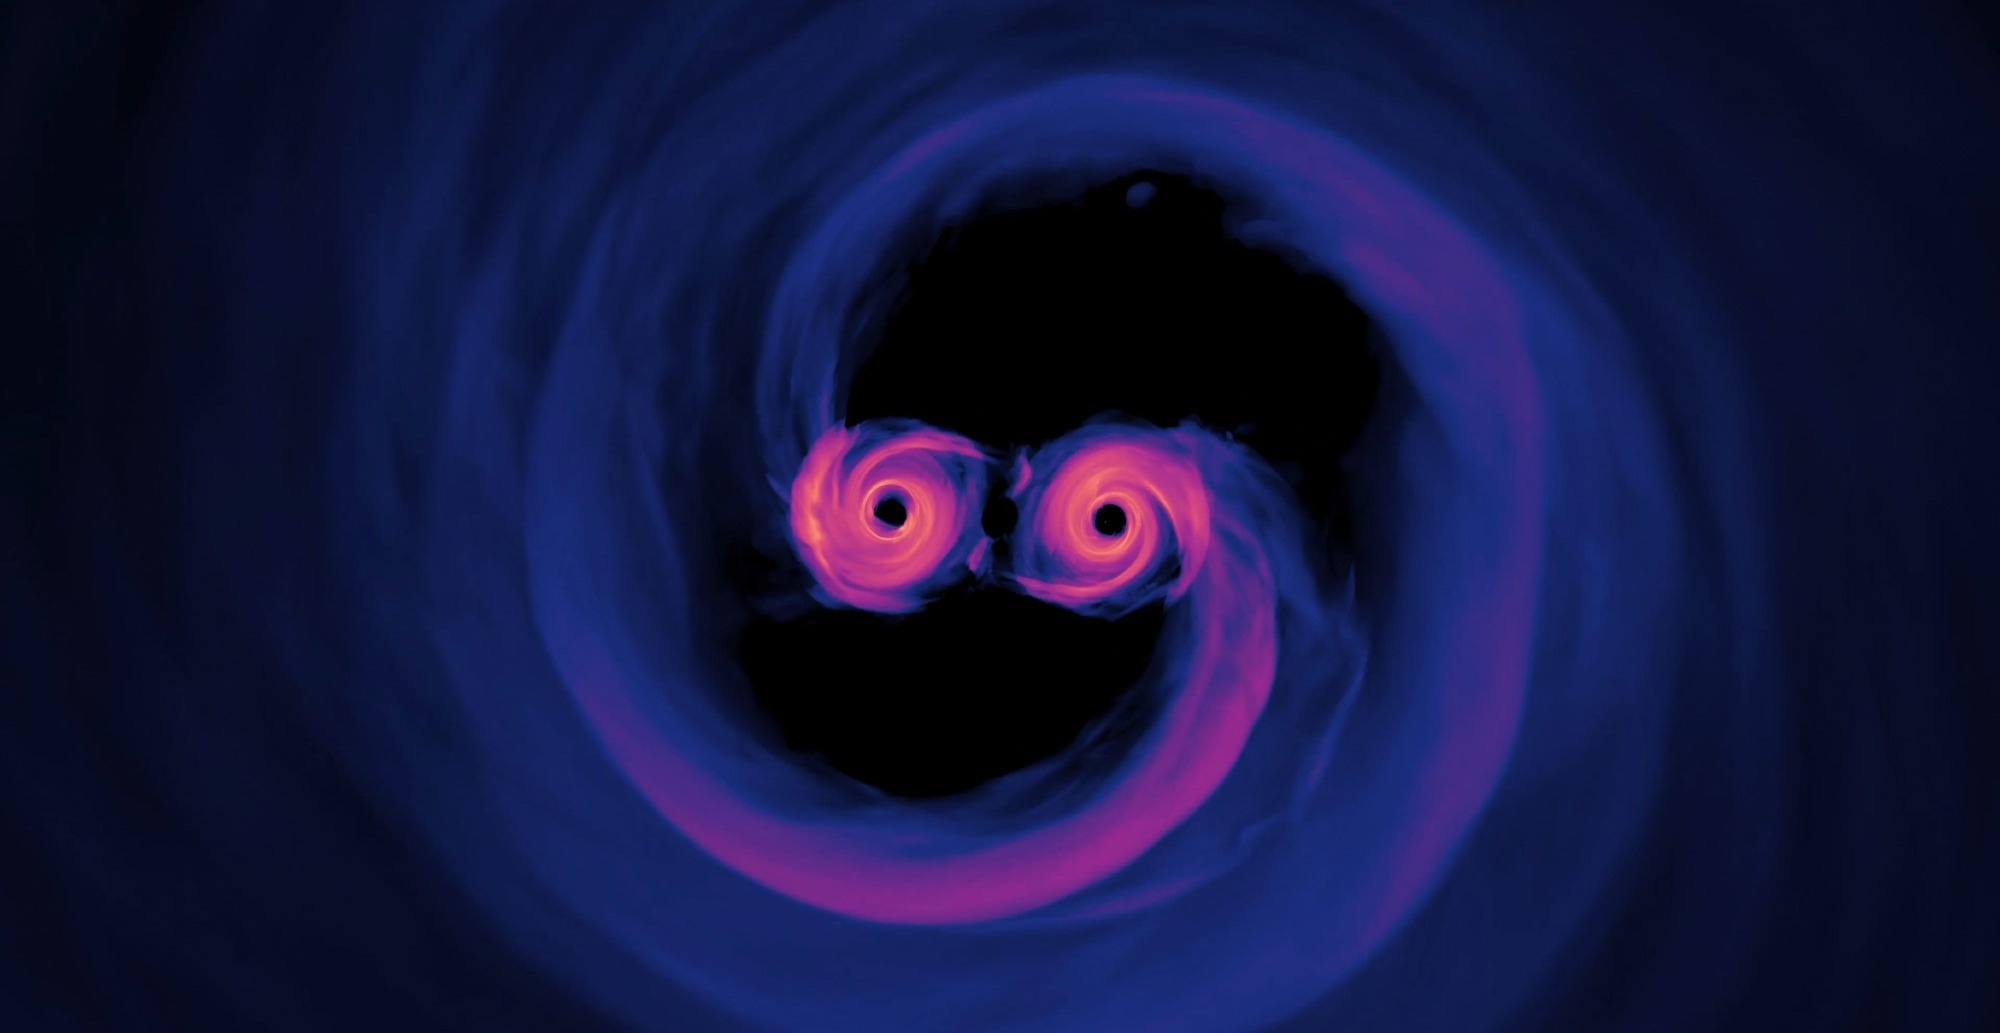 The gravitational waves emitted by the merger of black holes, when lensed by massive objects as the waves travel toward Earth can be used to calculate the rate at which the universe is expanding.